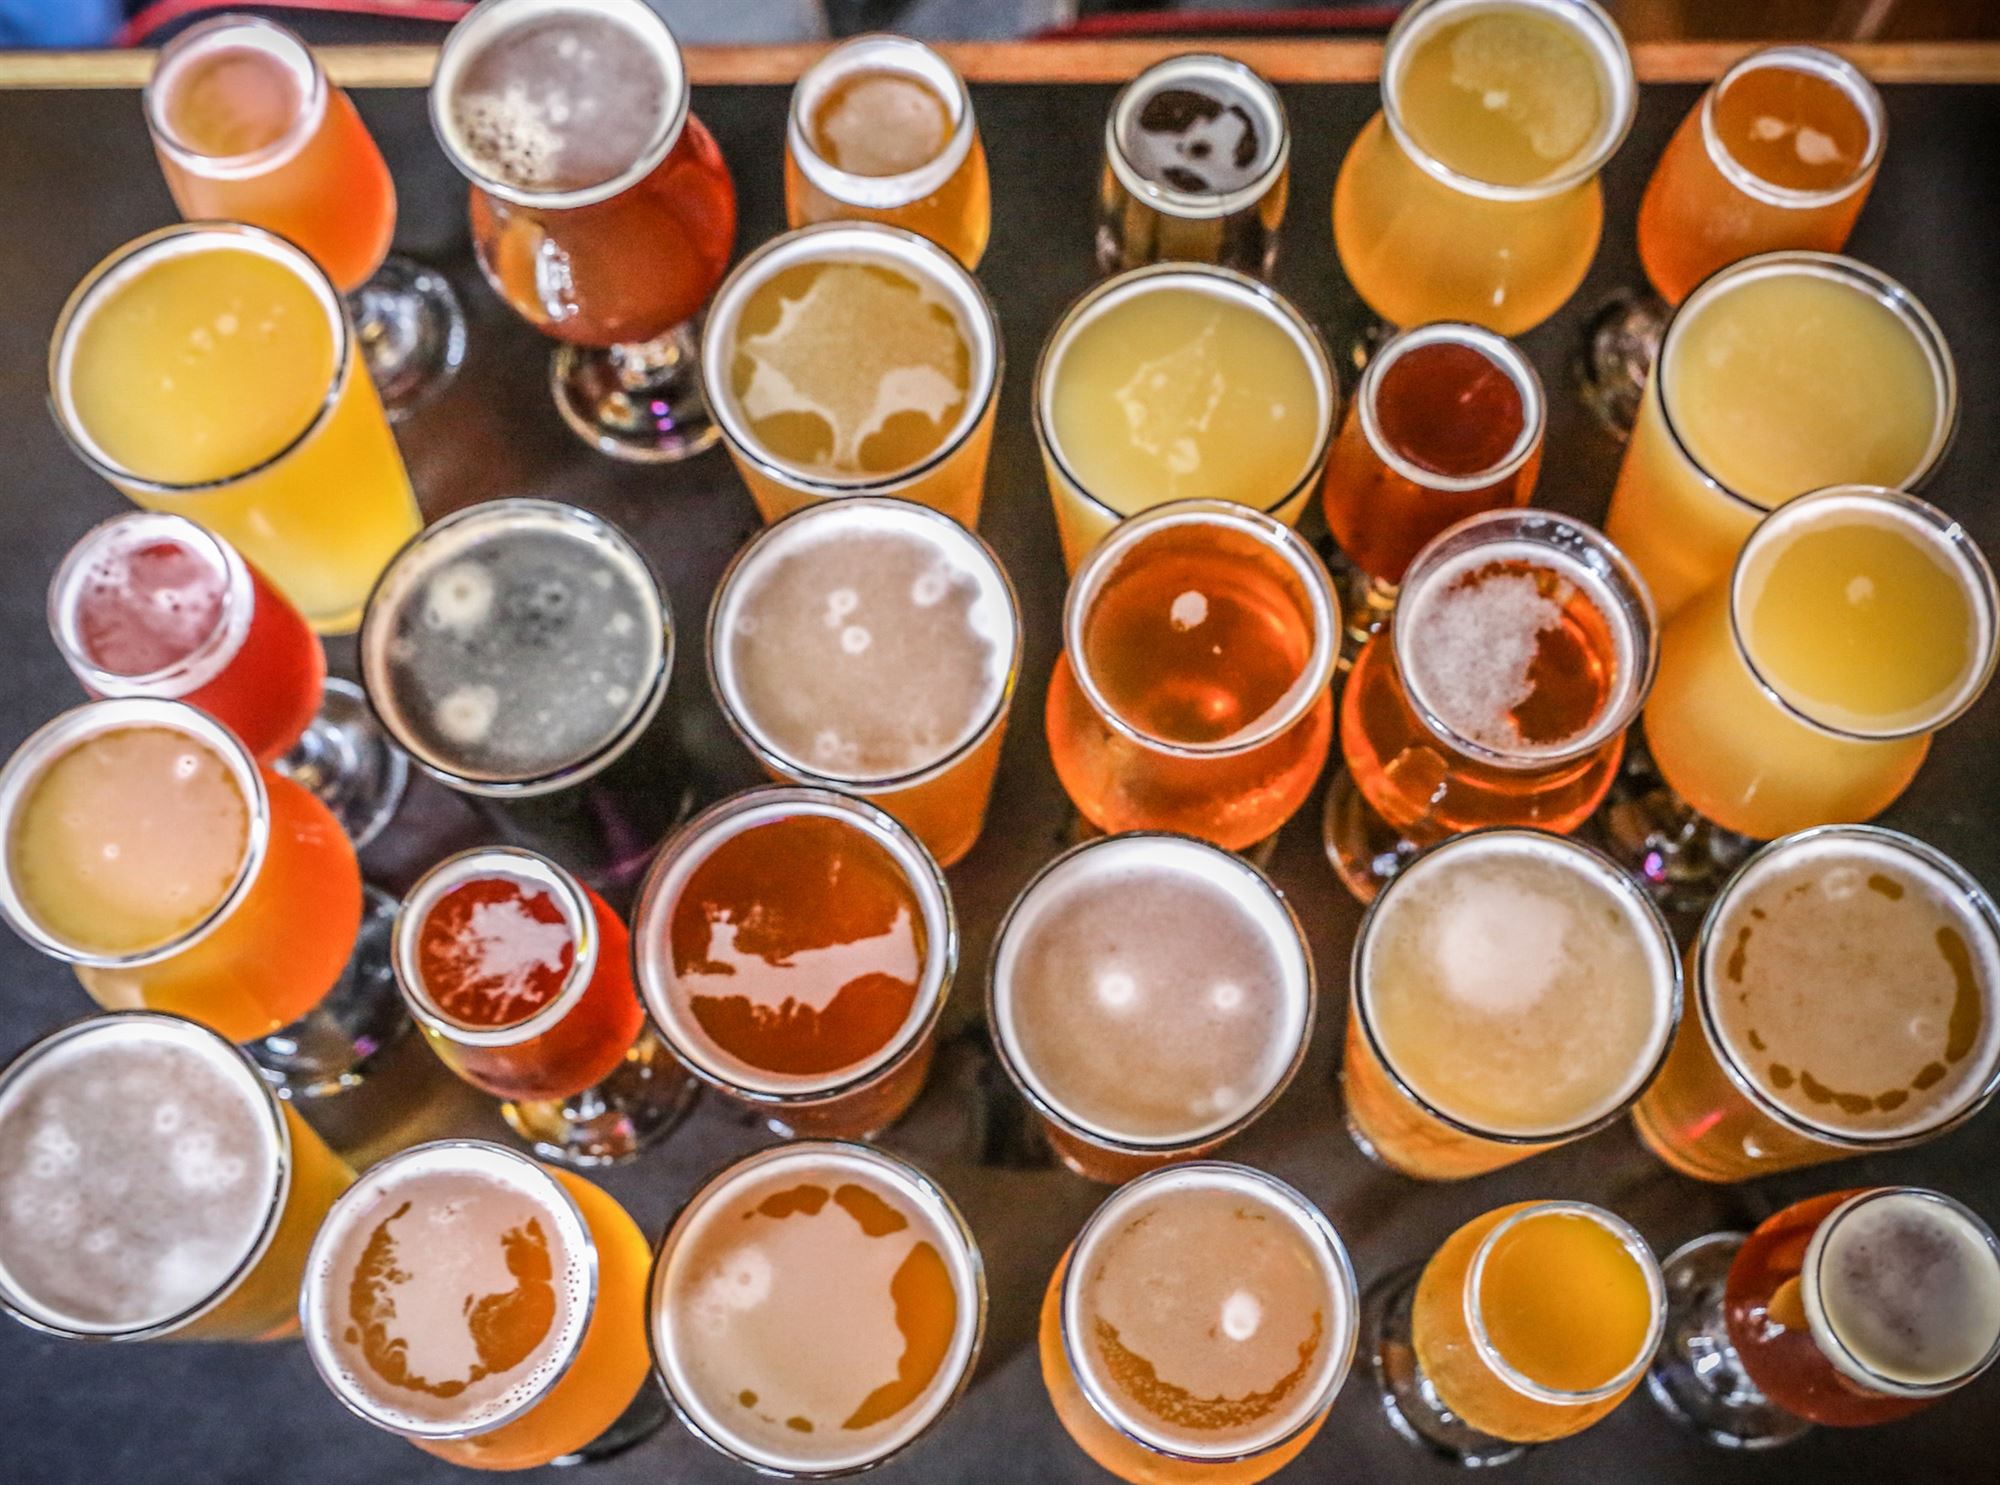 Breweries In Nj 67 Local Craft Brew Spots To Raise A Glass